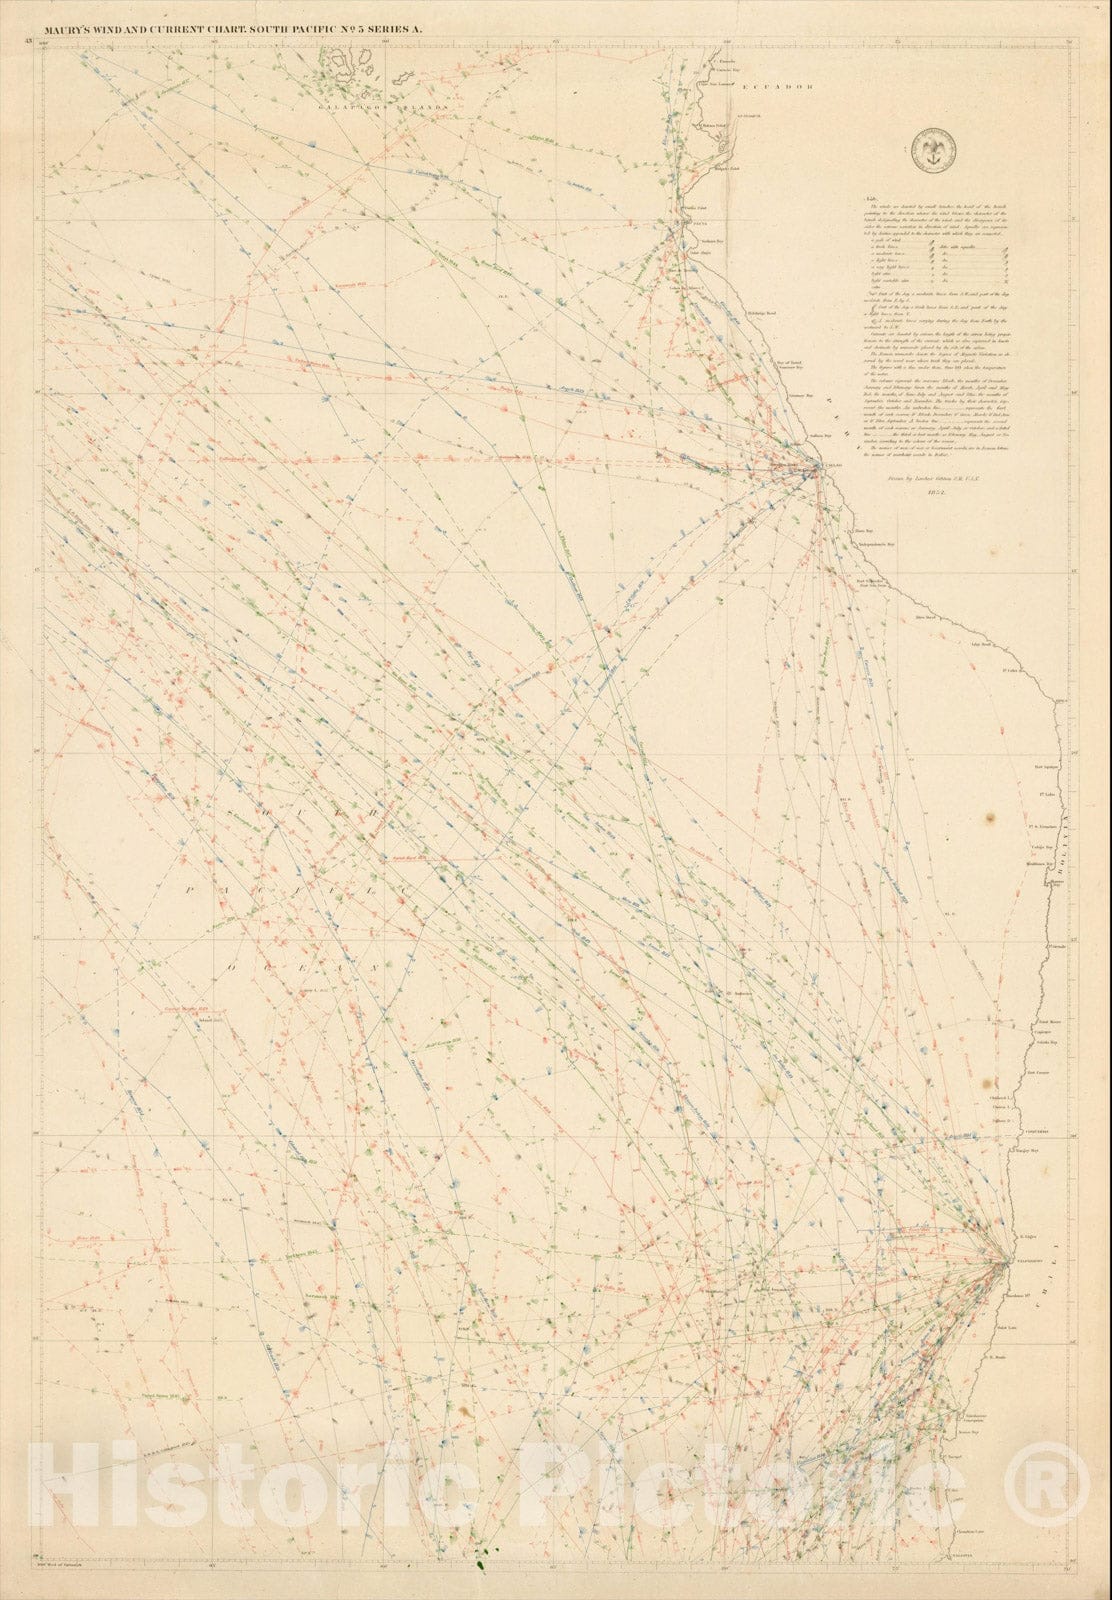 Historic Map : Maury's Wind and Current Chart. South Pacific No. 5 Series A. (Galapagos Islands, West Coast of South America), 1852, Matthew Fontaine Maury, Vintage Wall Art